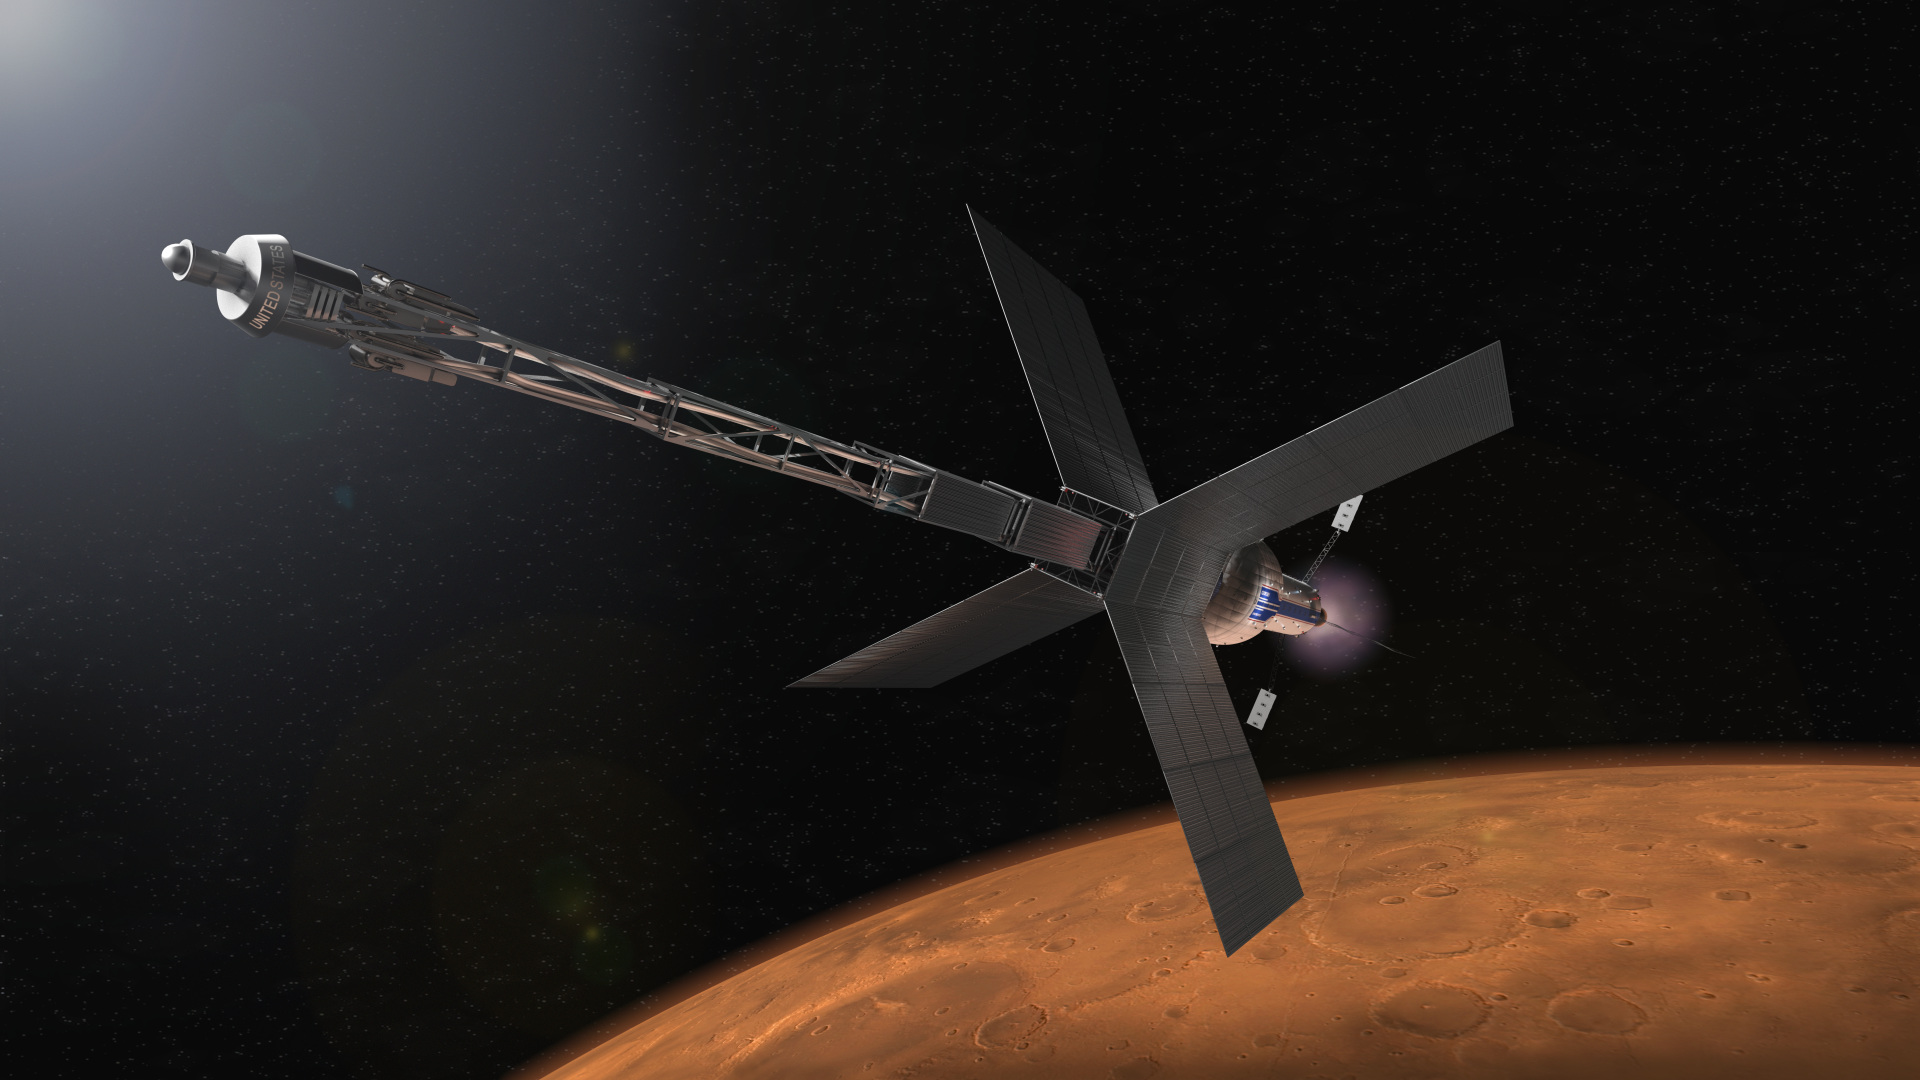 Nuclear rocket with 100,000 N thrust could offer fastest Mars trips [Video]